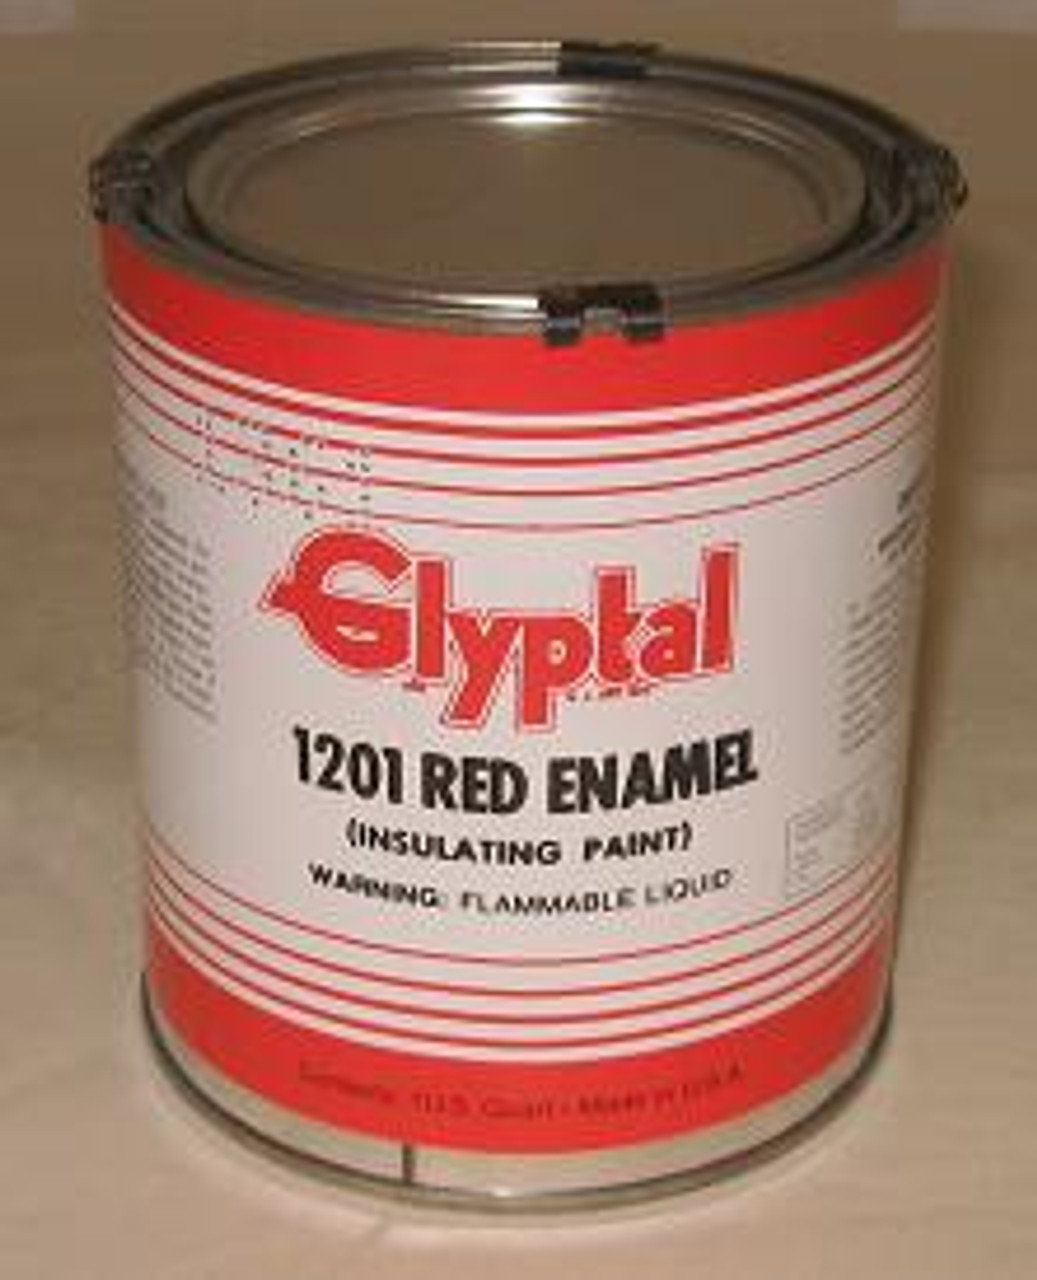 GLYPTAL 1201 RED GALLONS